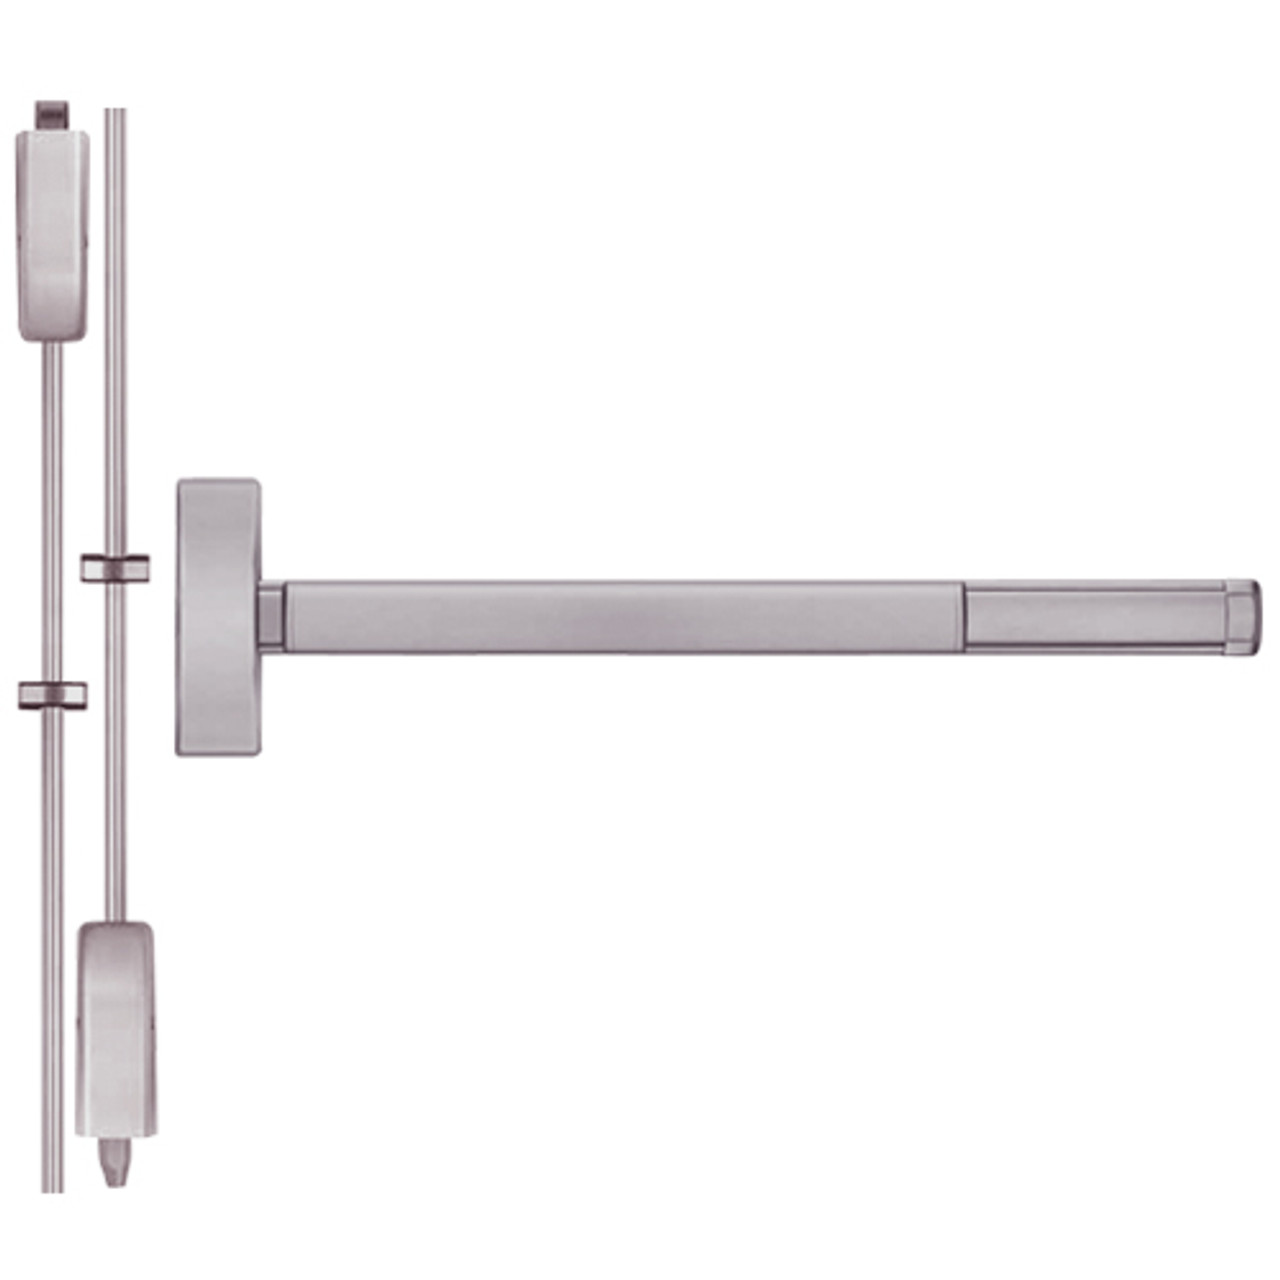 ELR2208LBR-630-48 PHI 2200 Series Non Fire Rated Apex Surface Vertical Rod Device with Electric Latch Retraction Prepped for Key Controls Lever/Knob in Satin Stainless Steel Finish